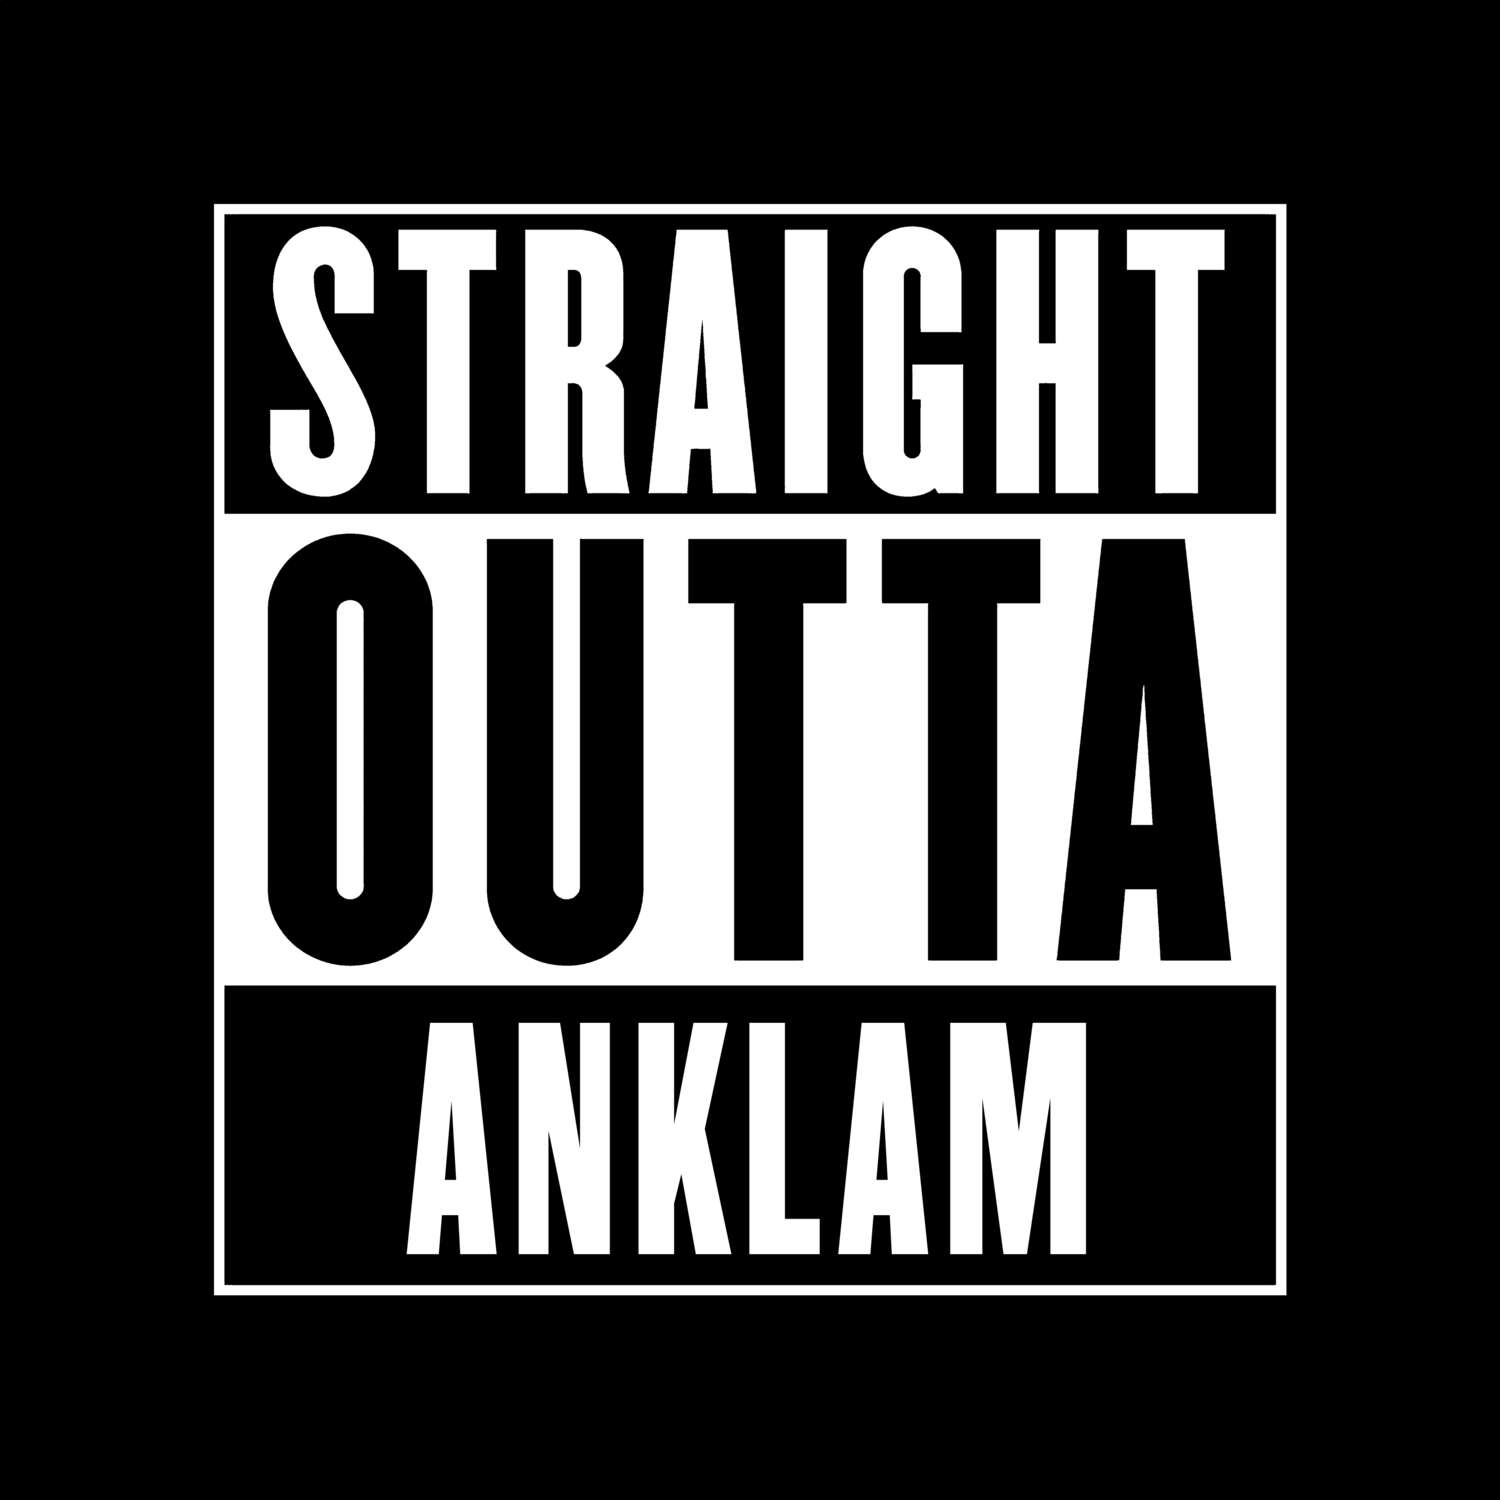 Anklam T-Shirt »Straight Outta«